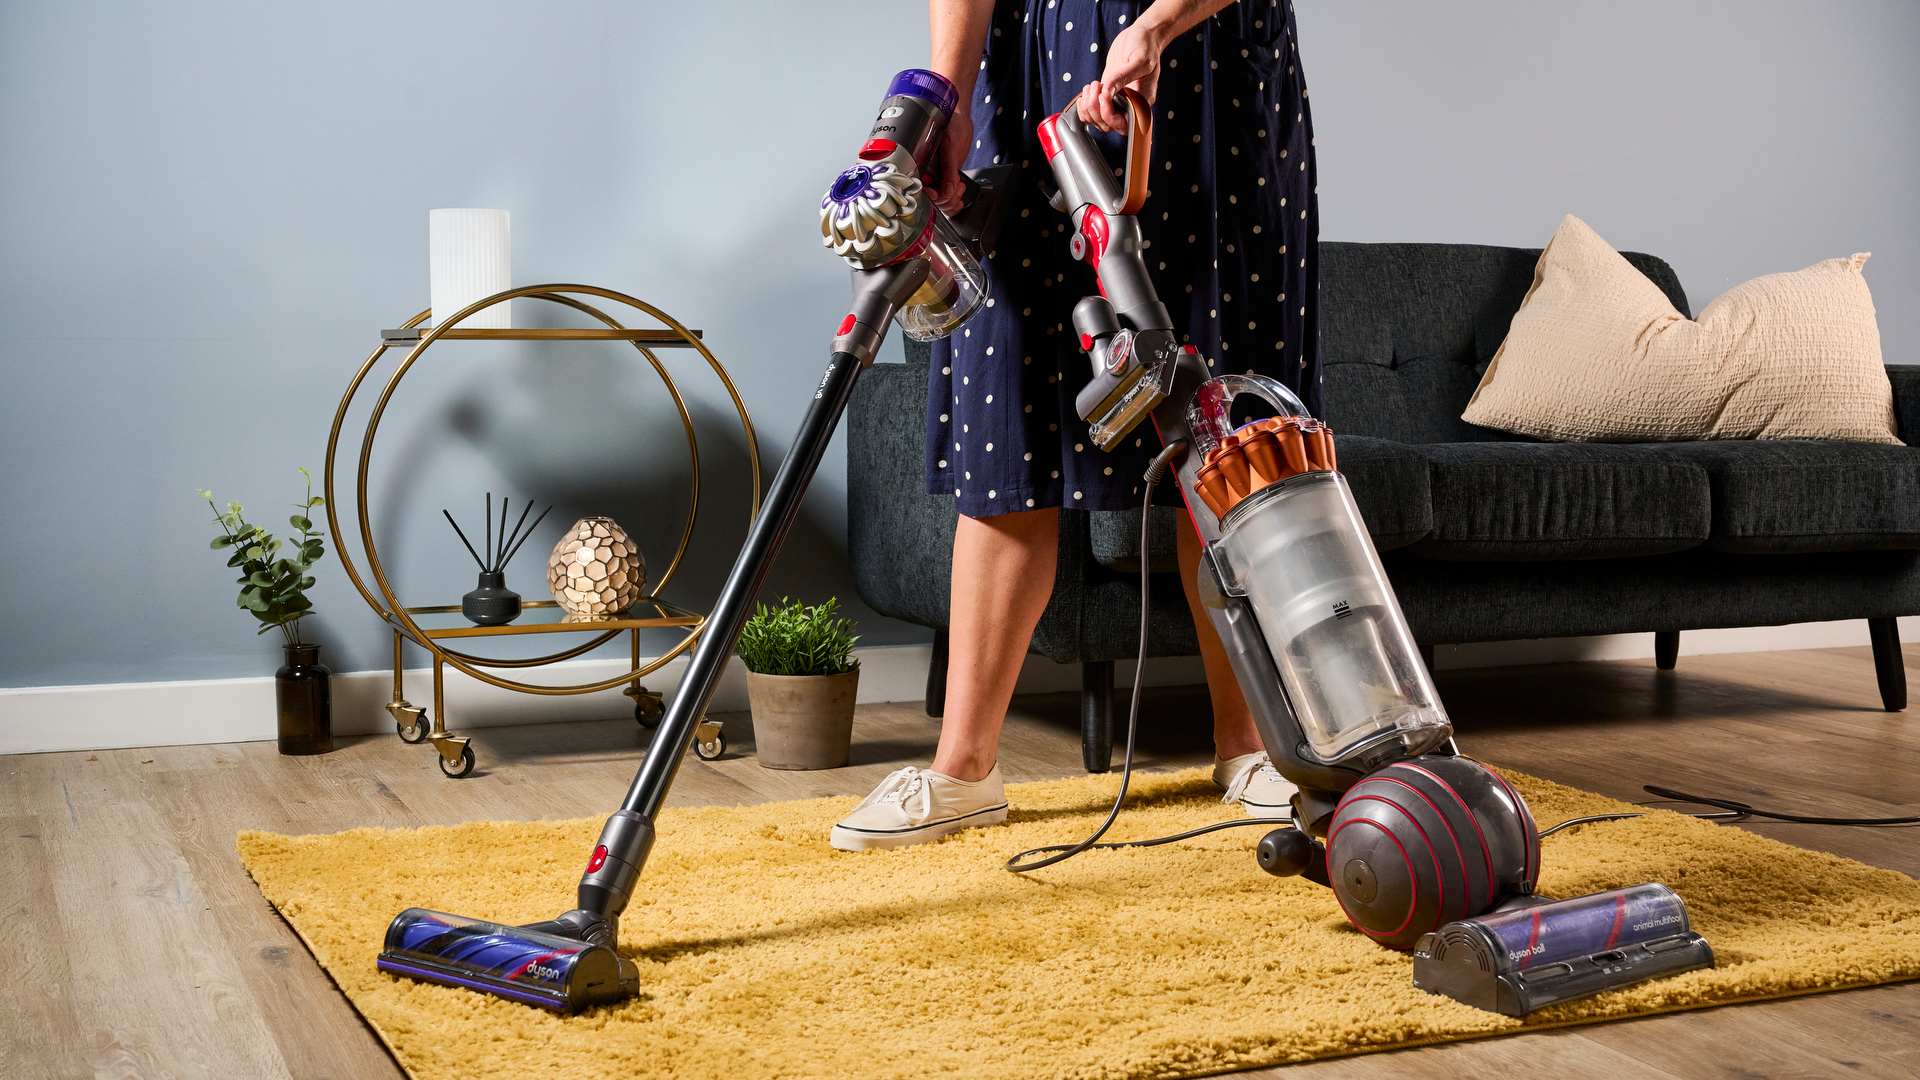 Tester holding Dyson Ball Animal upright vacuum cleaner next to the Dyson V8 to show comparison